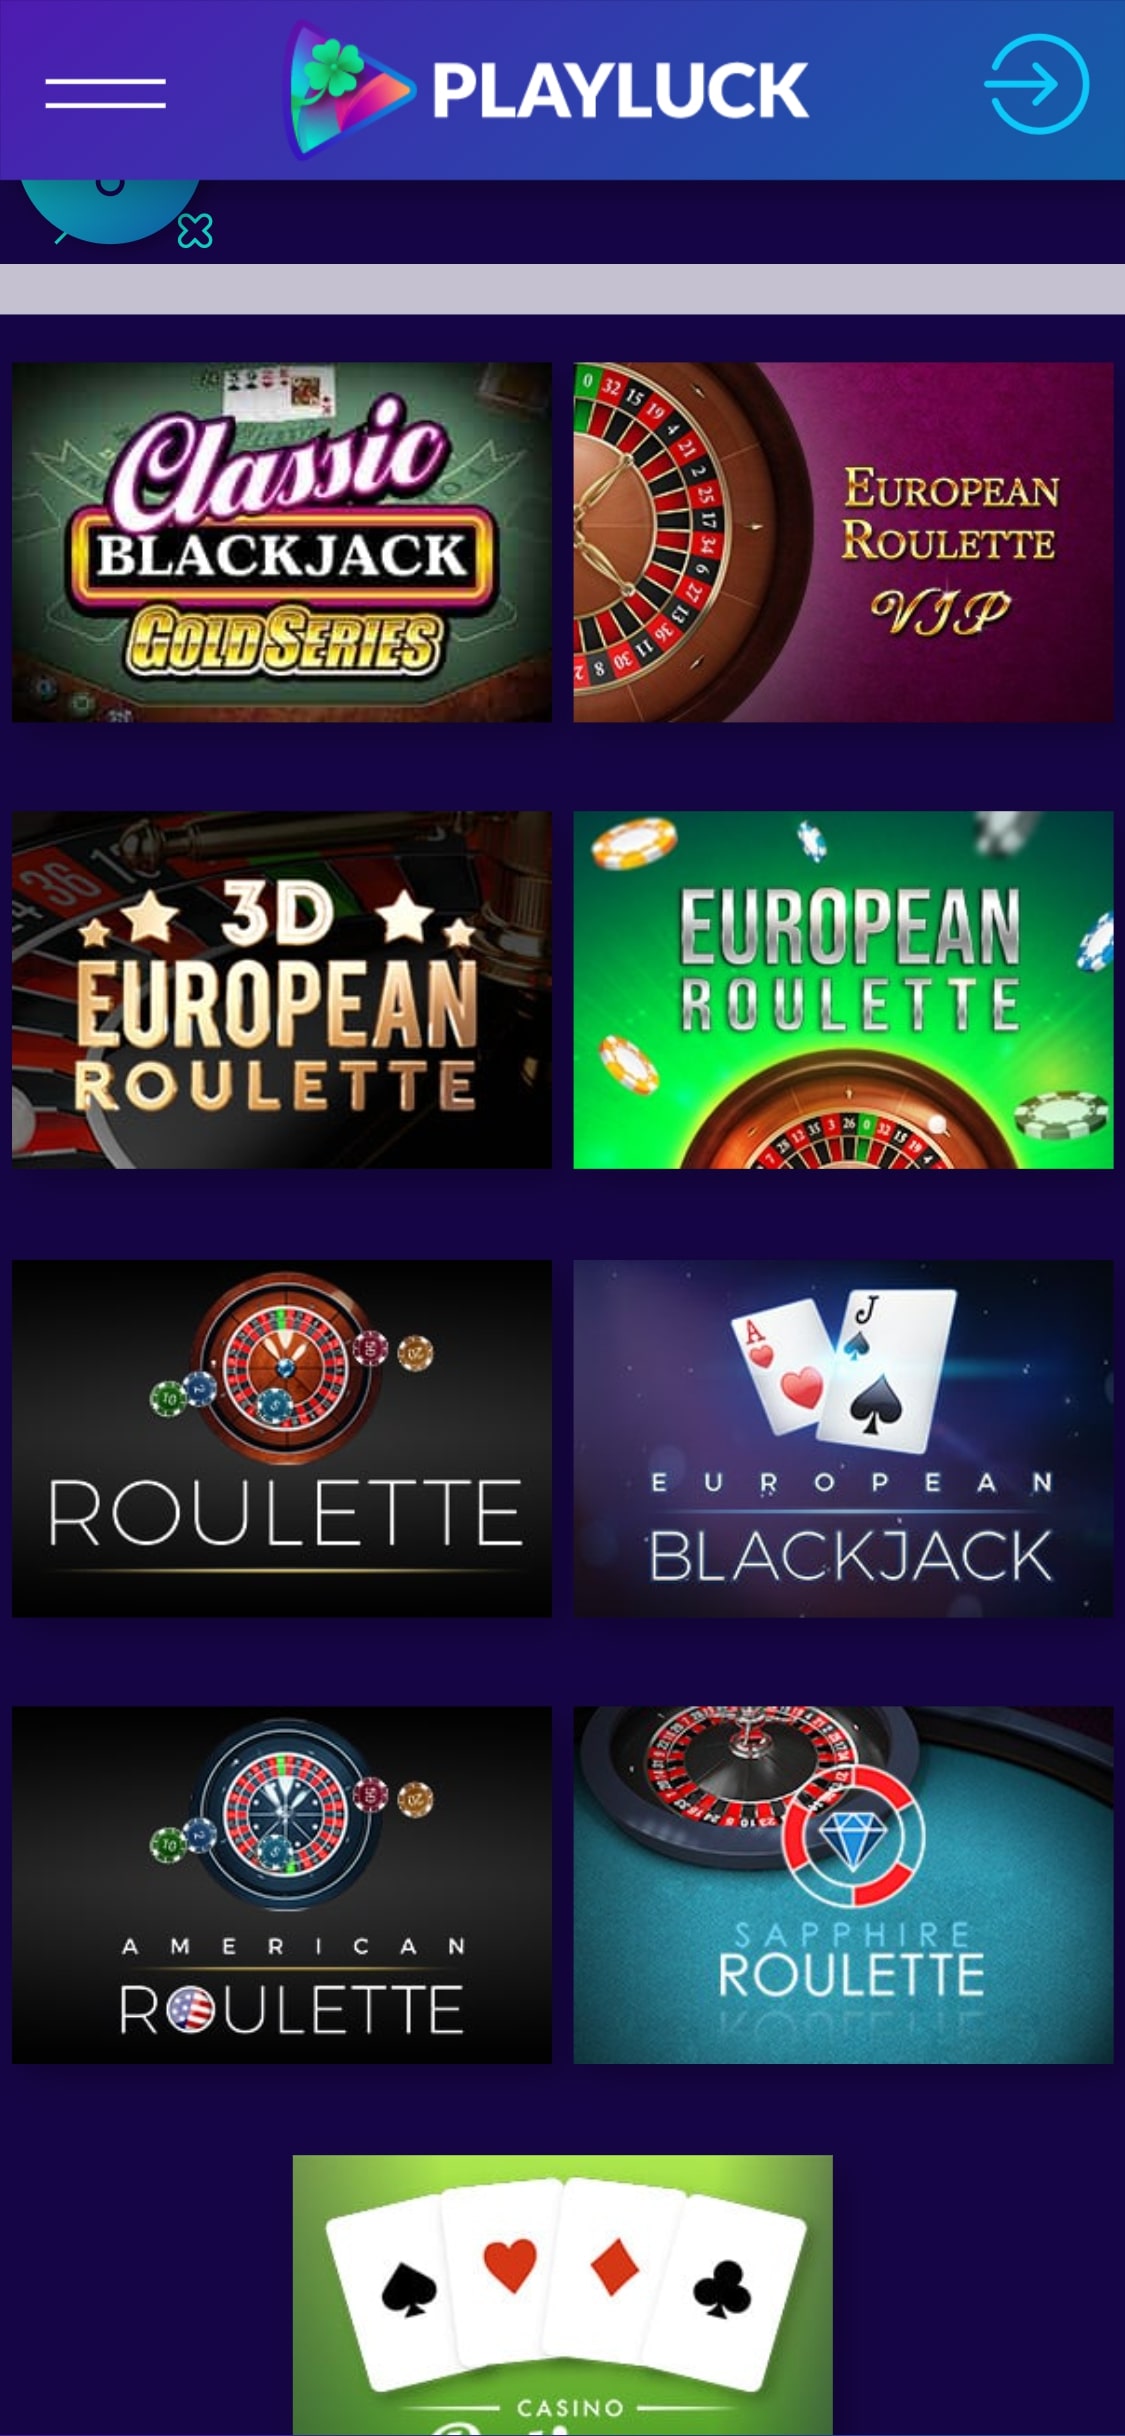 Playluck Casino Mobile Live Dealer Games Review